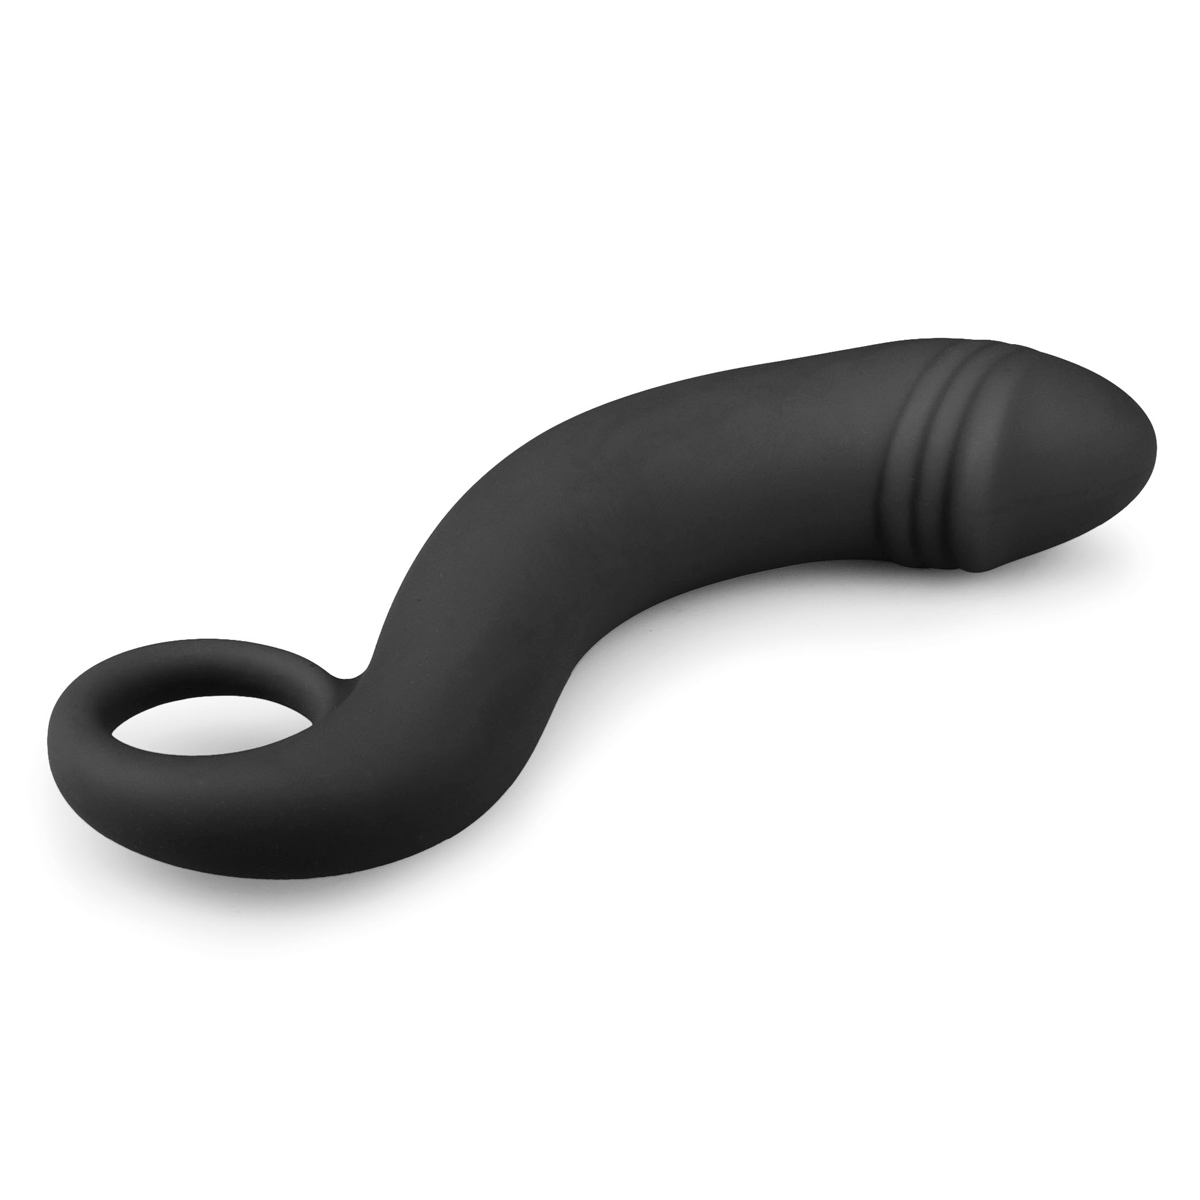 Dildo Anal ET Curved Dong Black